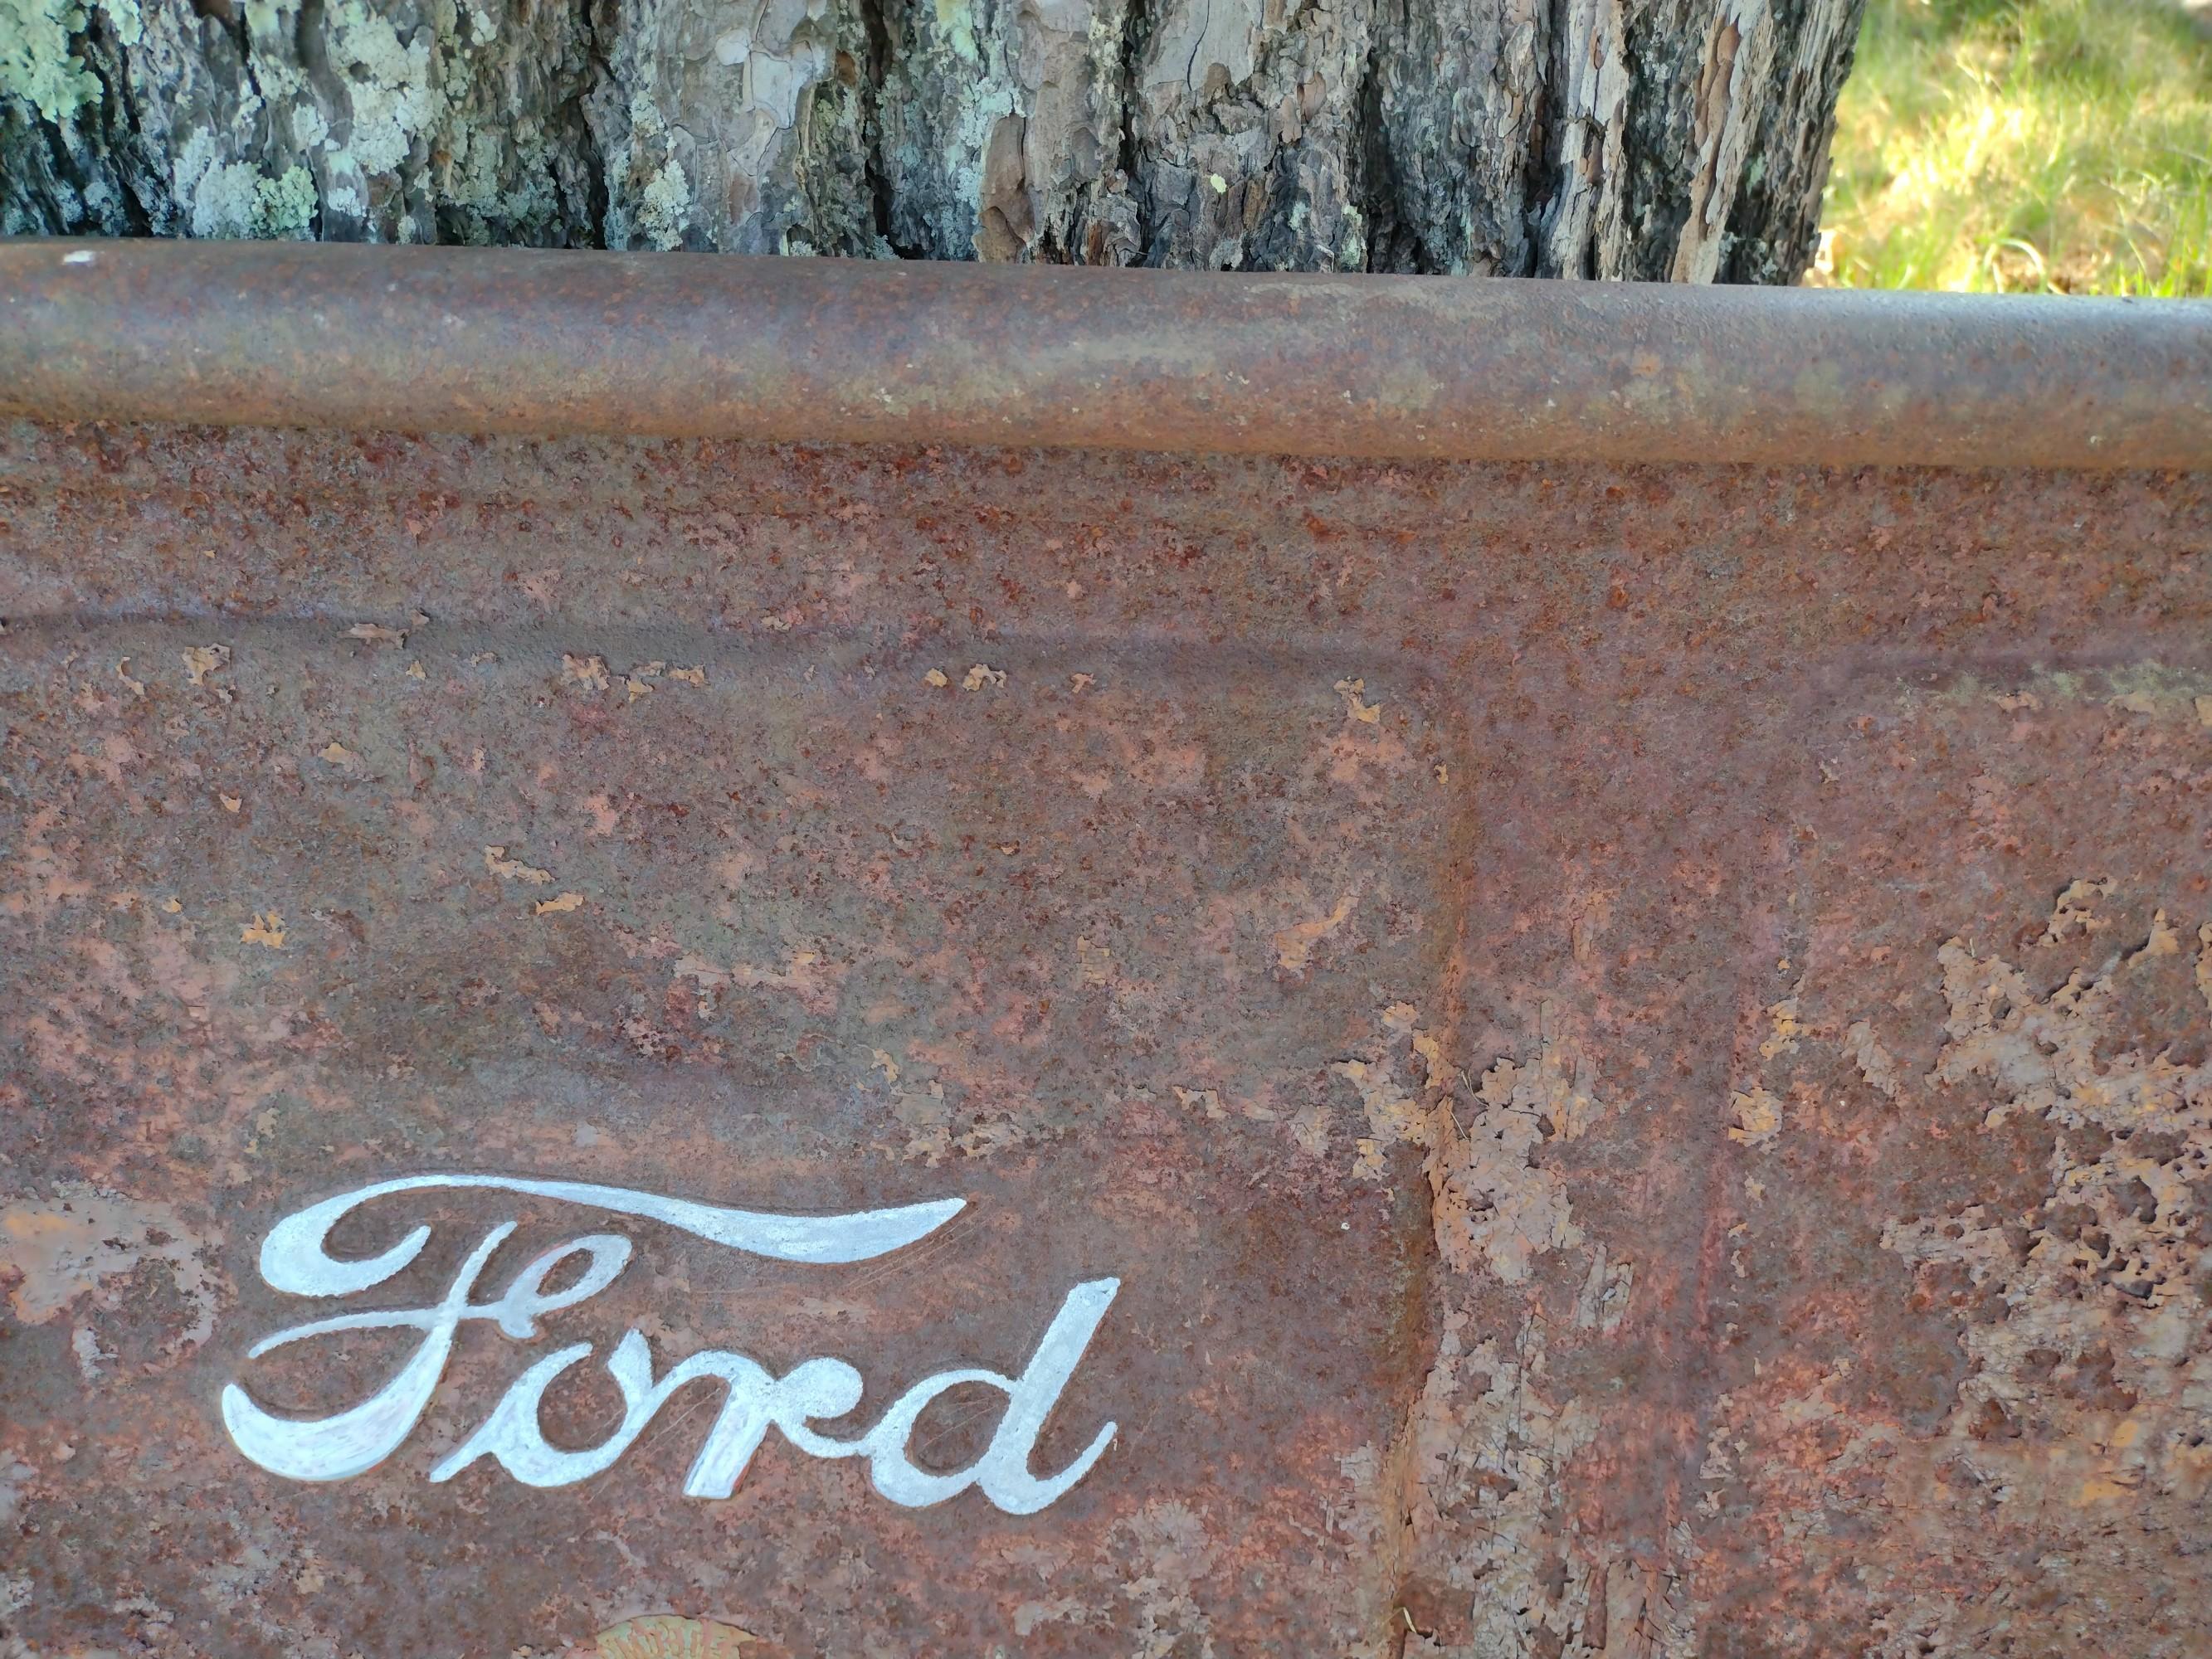 Ford Tailgate 40s And 50s Era.